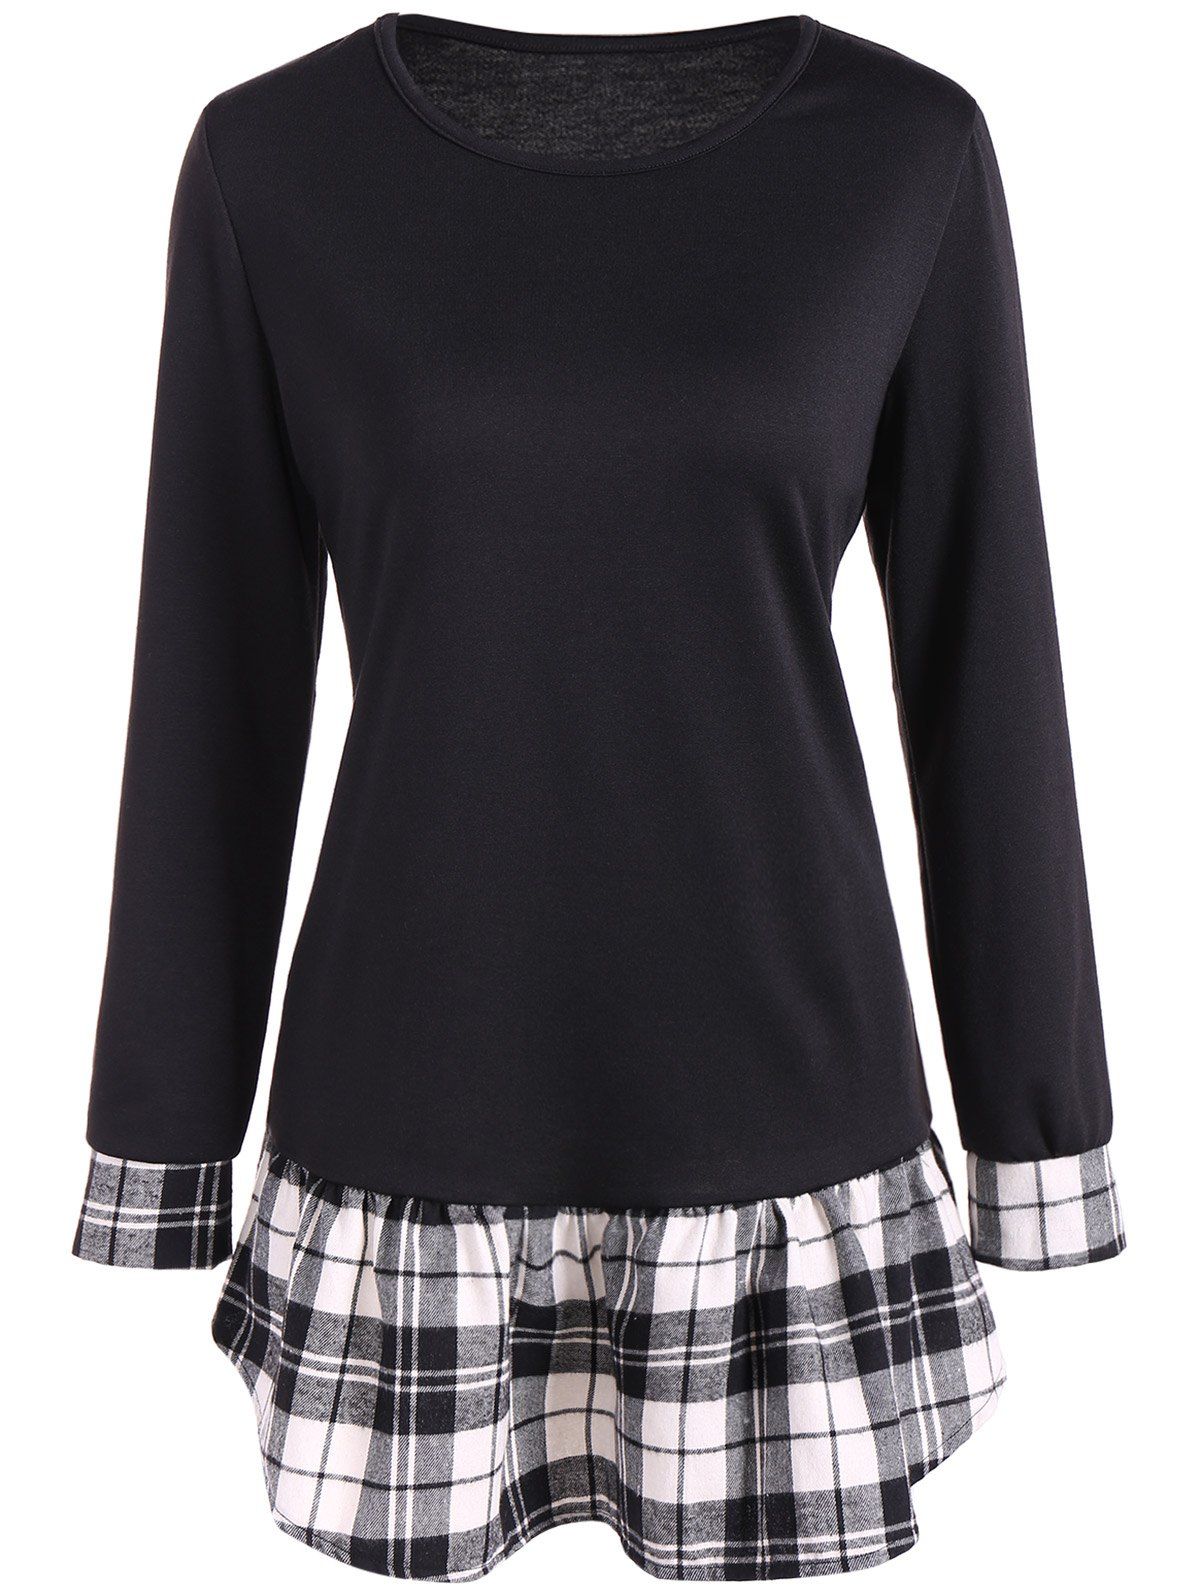 [77% OFF] Long Sleeve Peplum Tee With Plaid Details | Rosegal